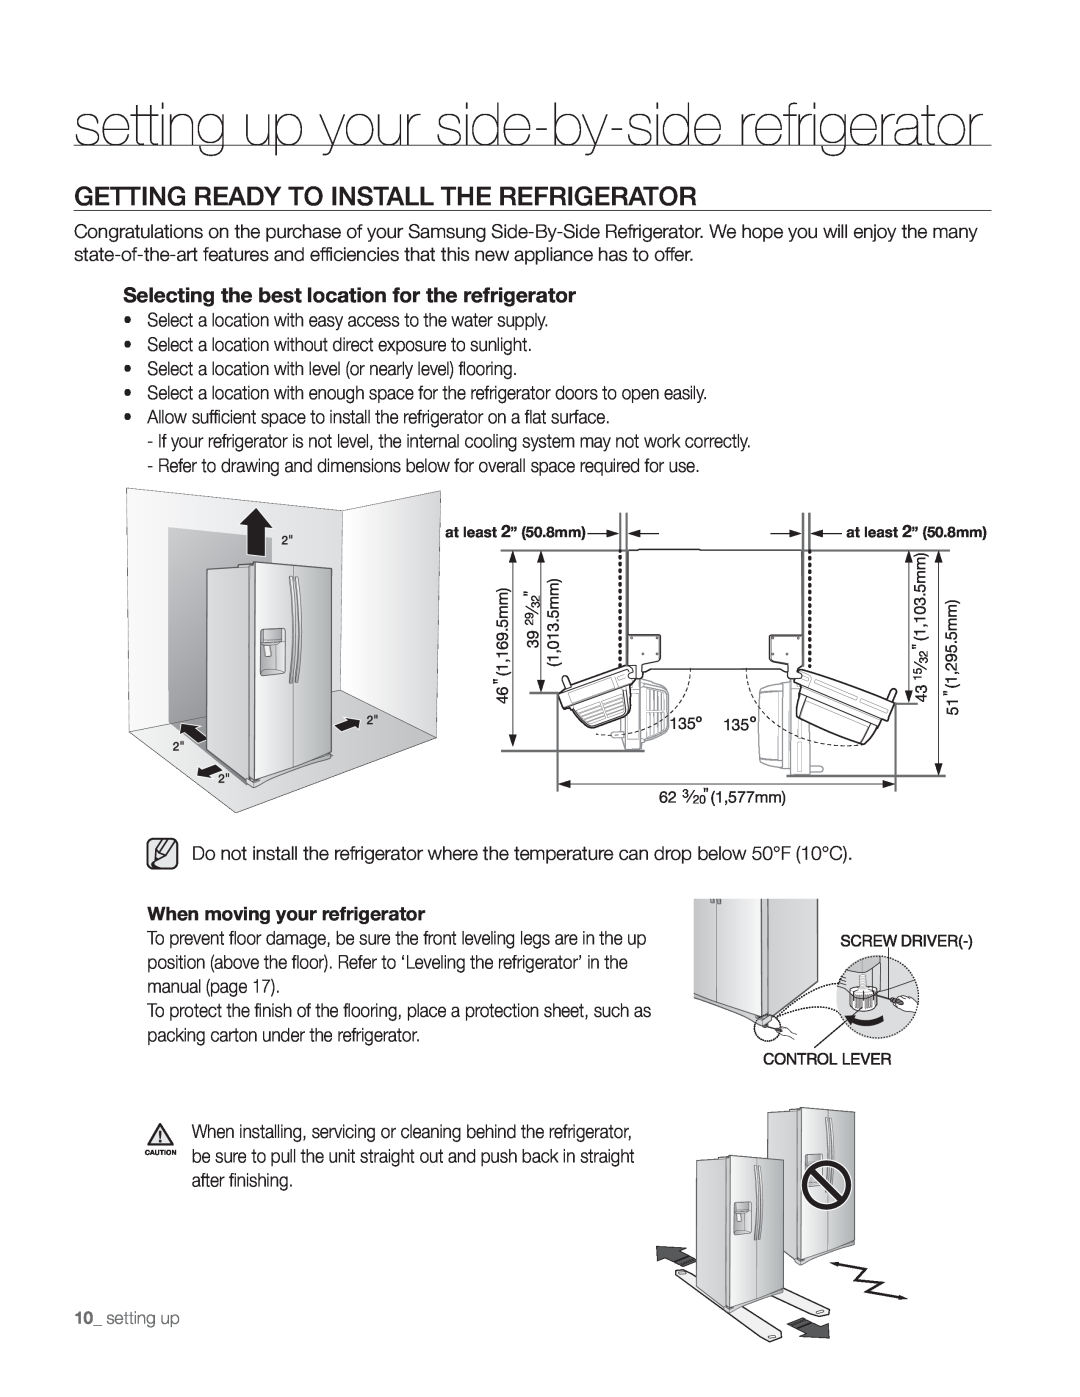 Samsung DA68-01890Q user manual setting up your side-by-siderefrigerator, Getting Ready To Install The Refrigerator 